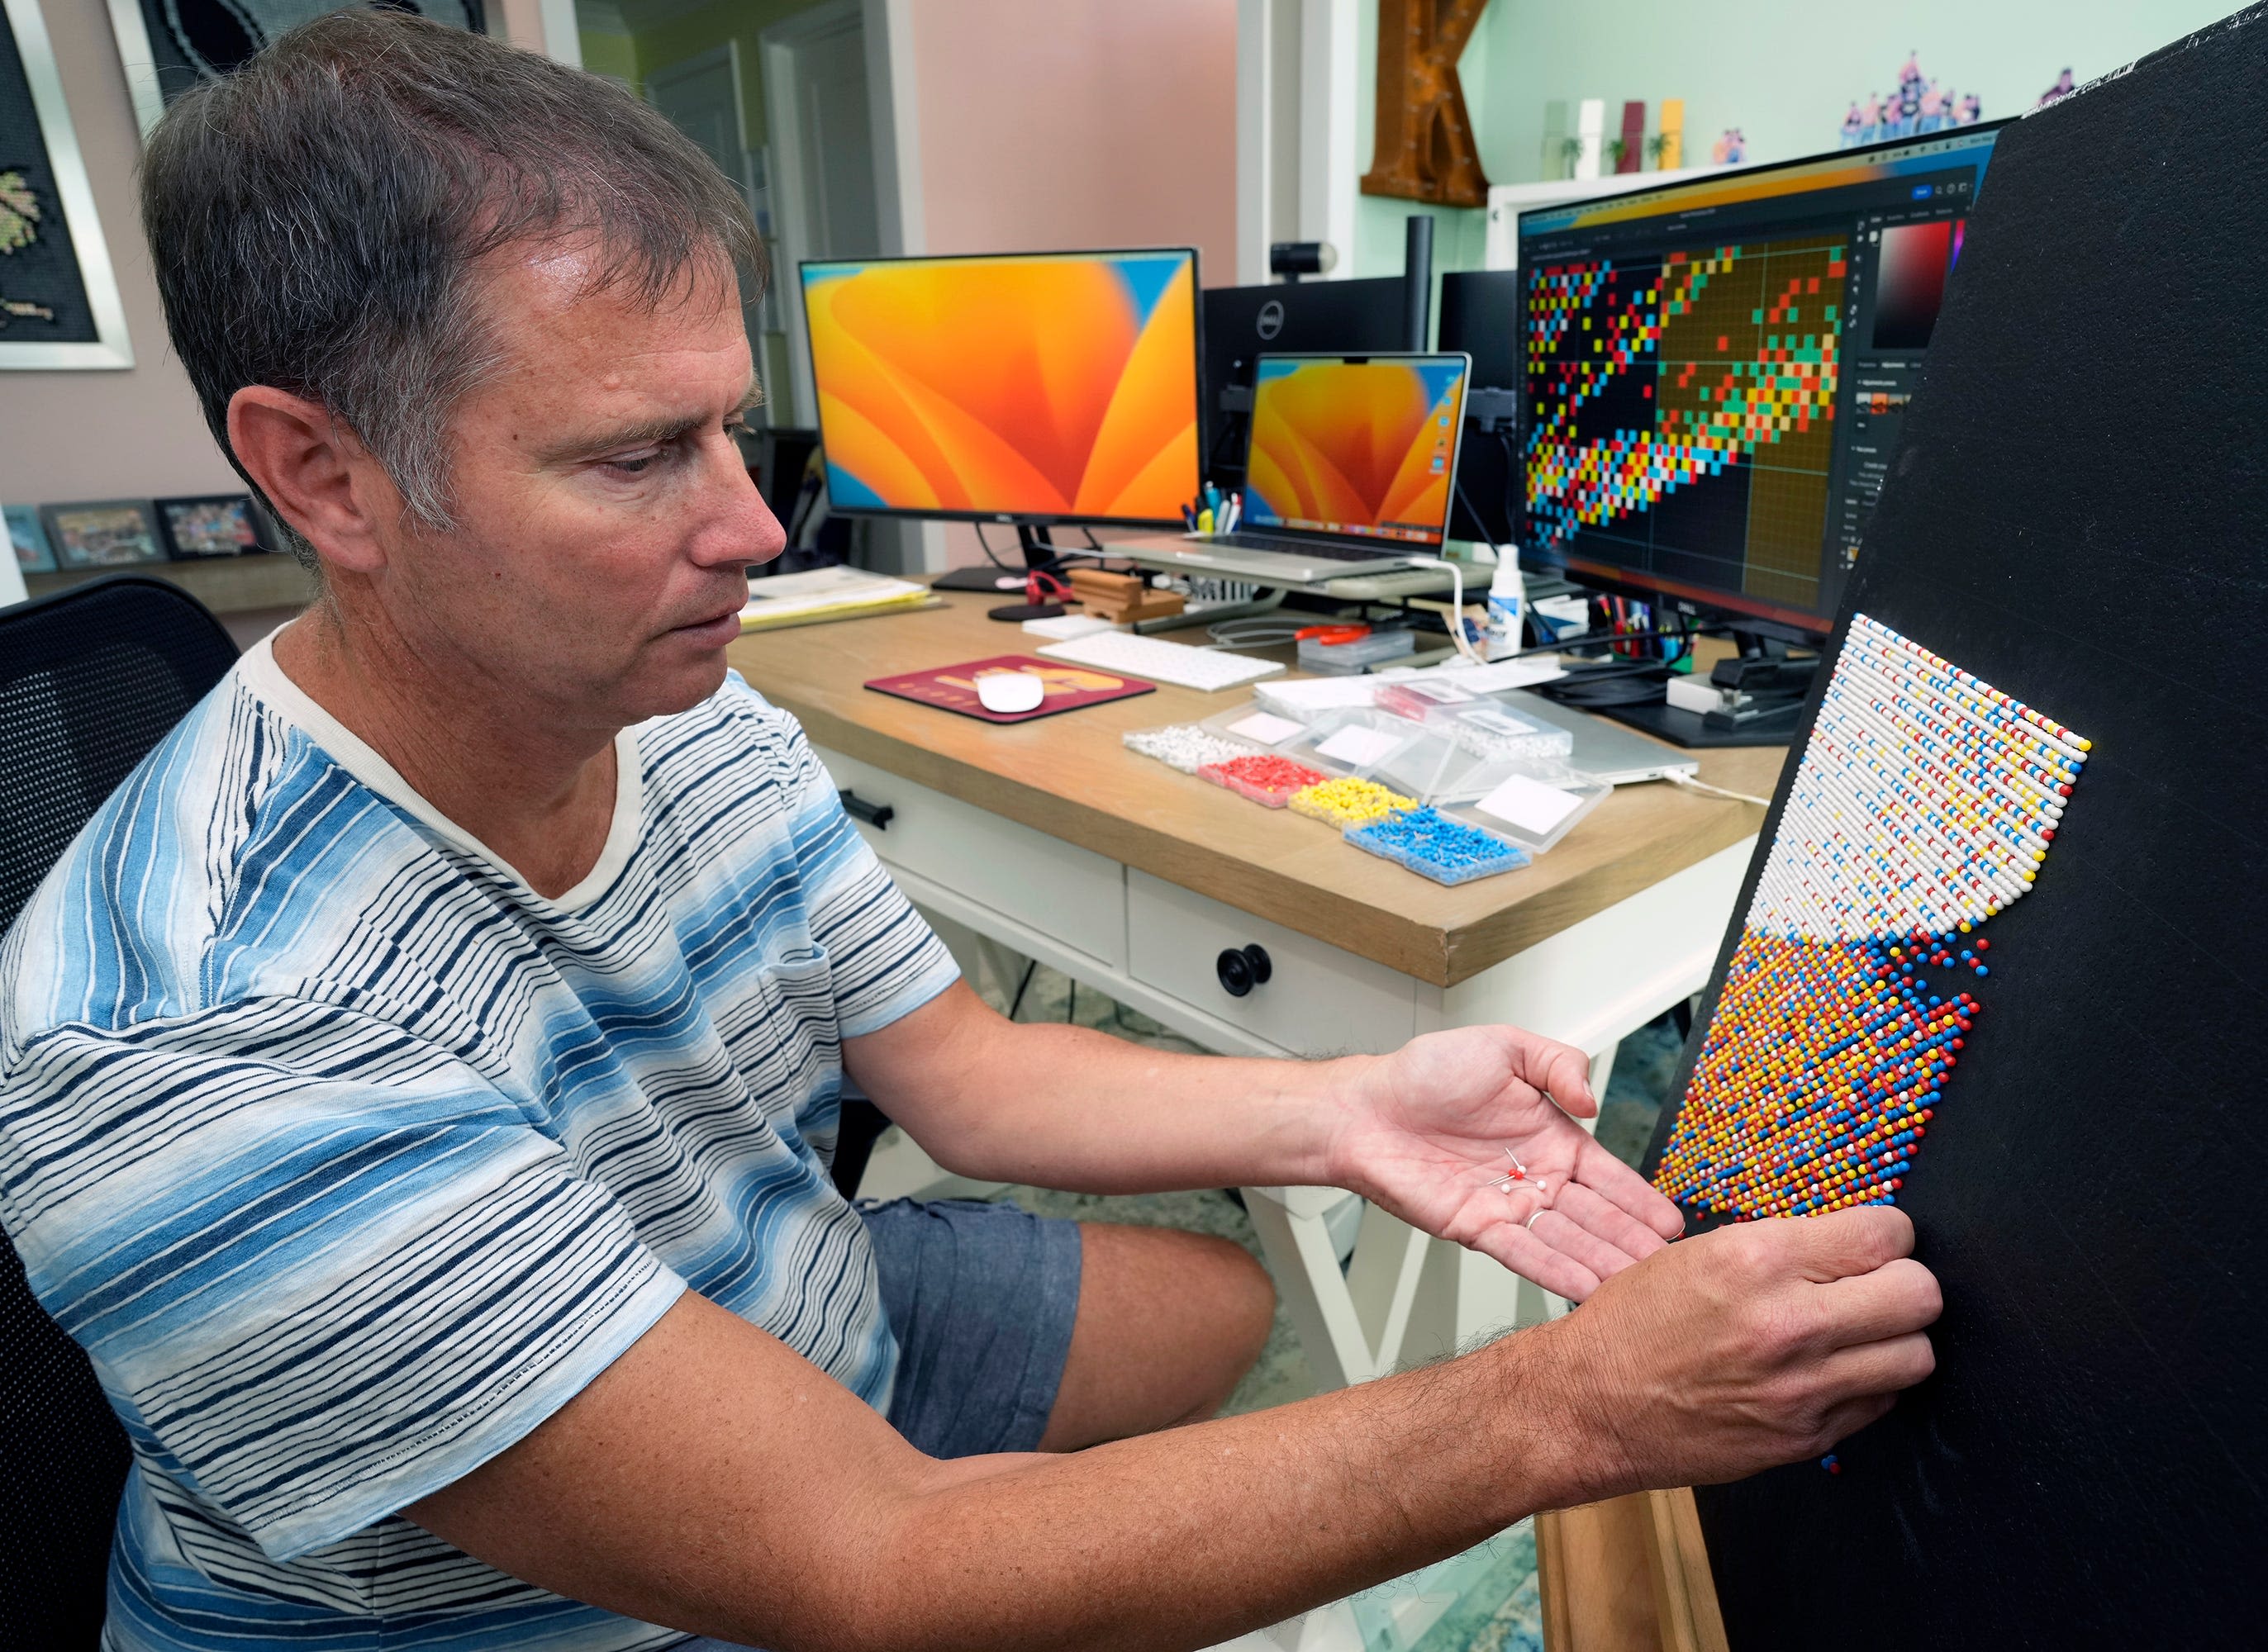 Fighting depression and anxiety, Daytona man's passion for pointillism brings him purpose